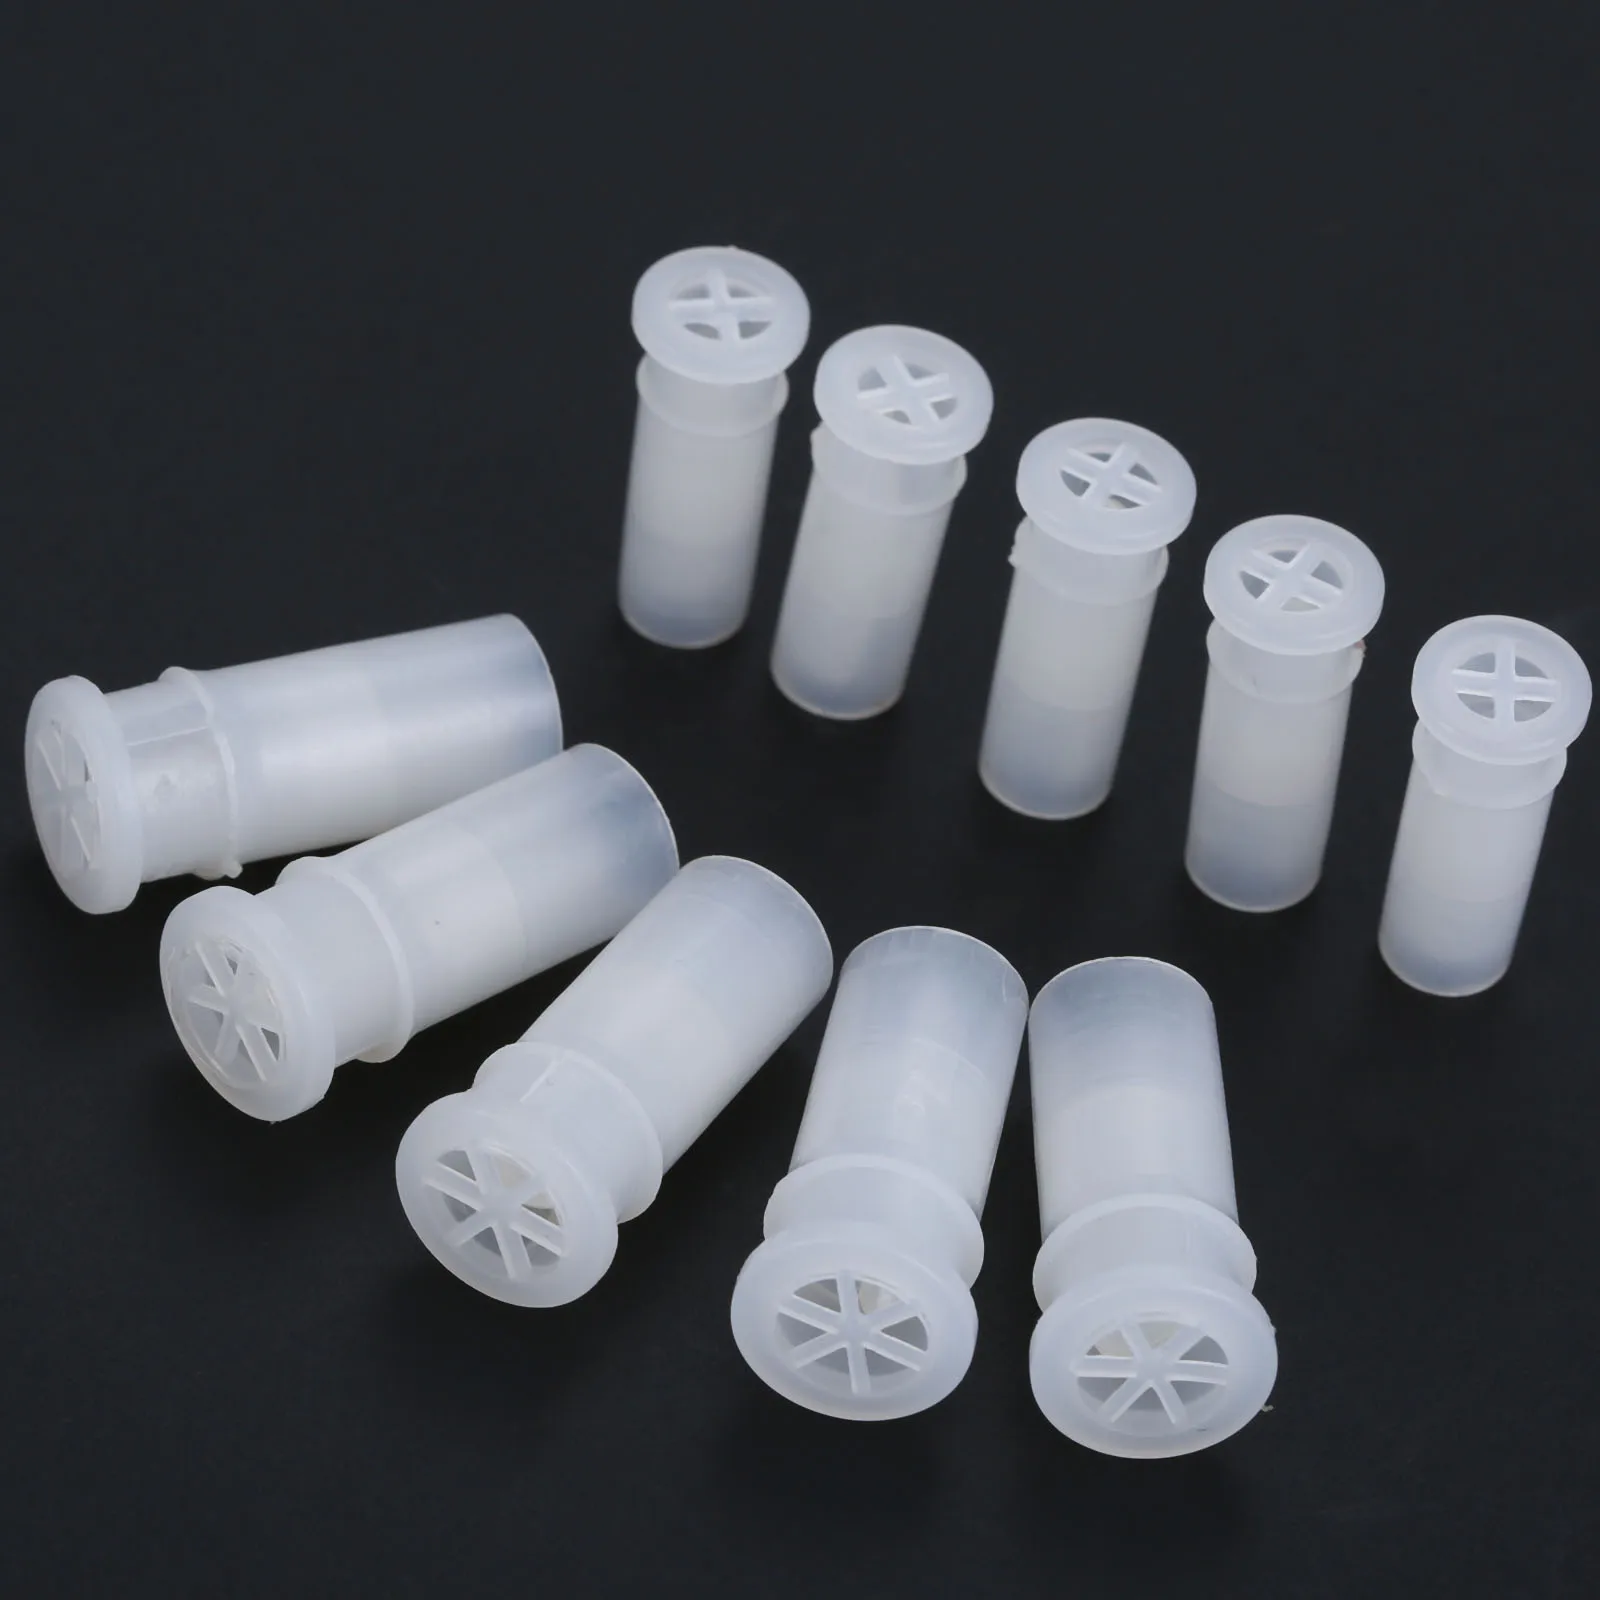 100Pcs Plastic White Toy Dog Cat Squeakers Shoes Repair Fix Pet Baby Toy Noise Maker Insert Replacement 15*6.5mm/18.5*9mm